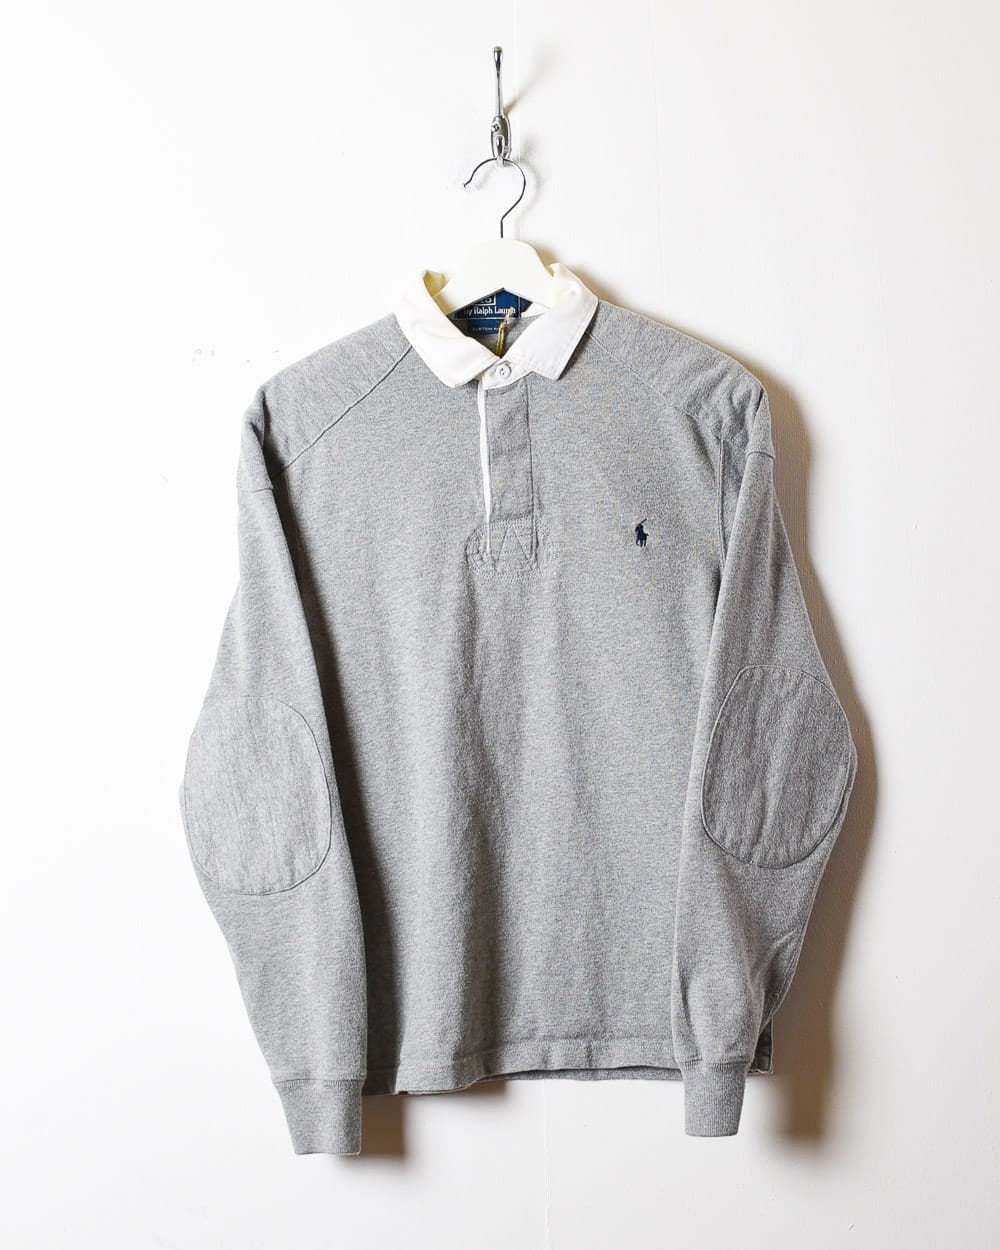 Stone Polo Ralph Lauren Rugby Shirt - Small